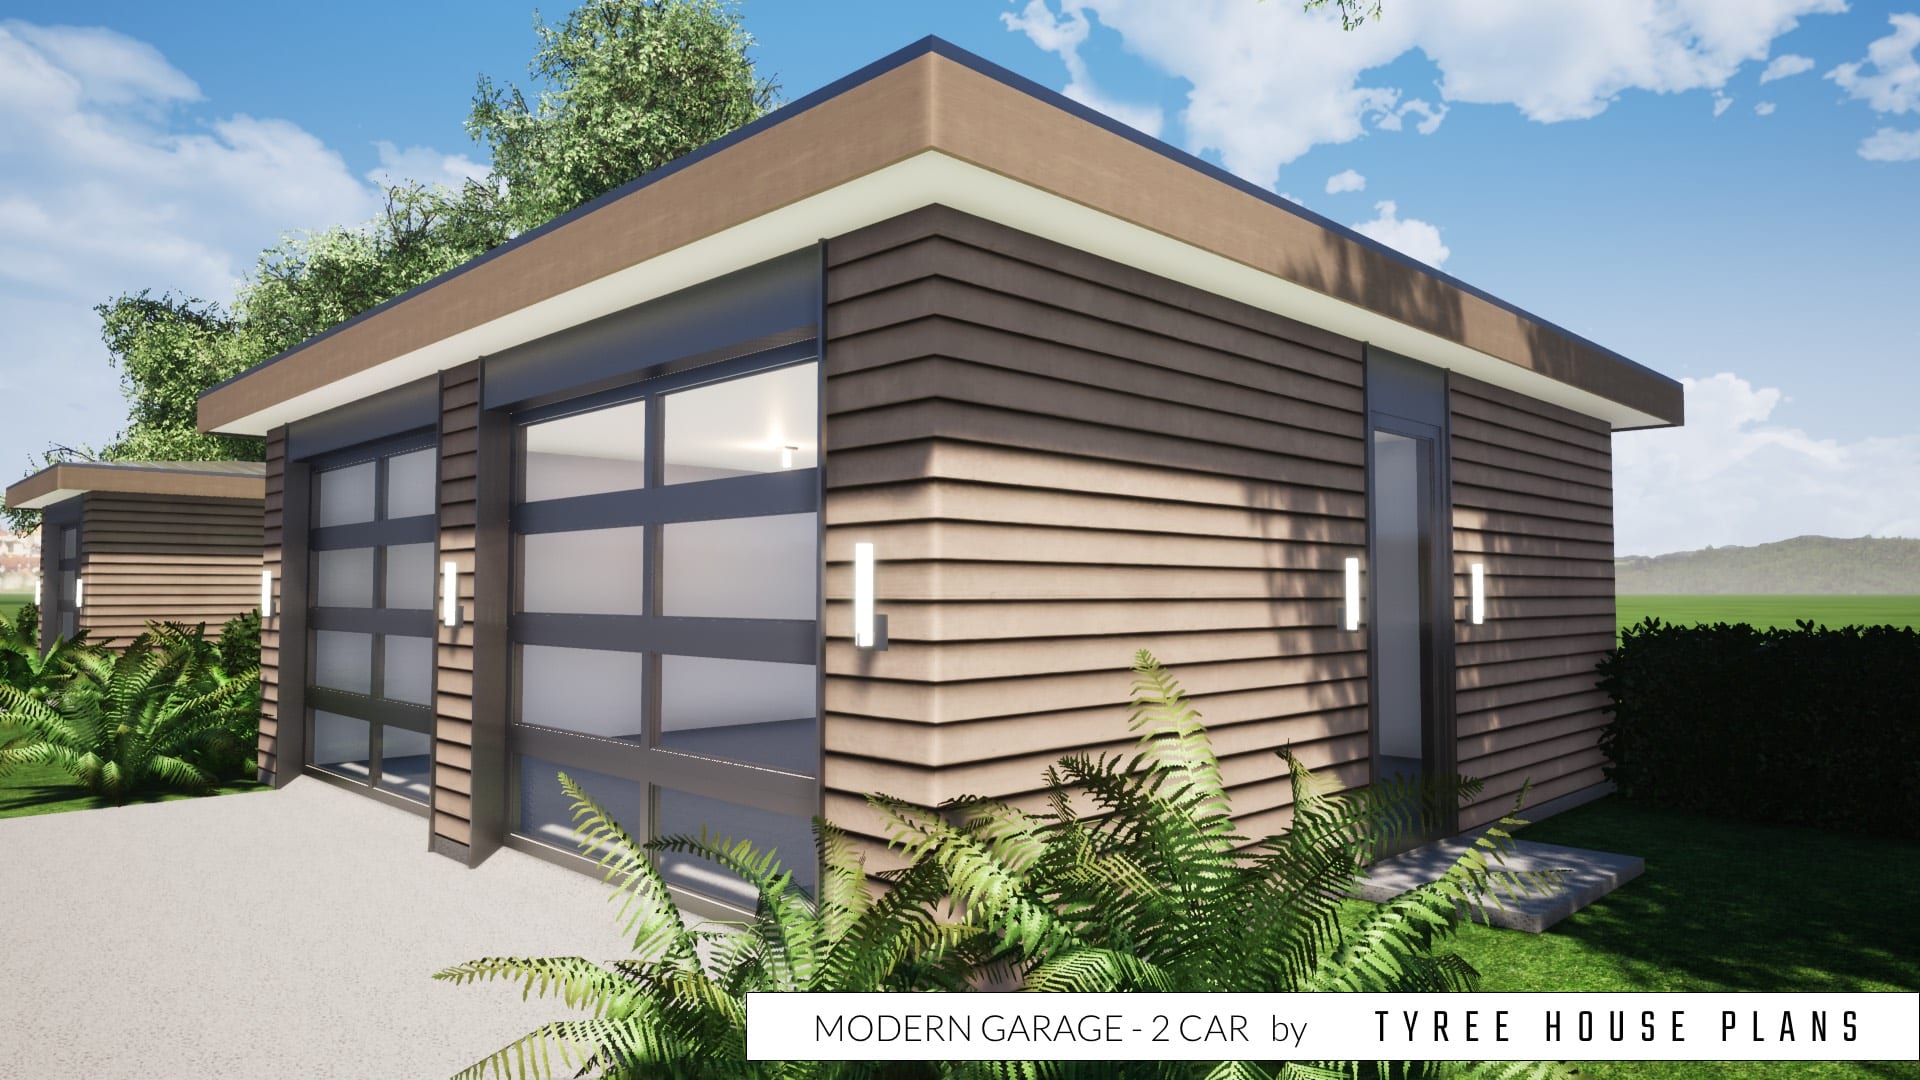 Modern Garage - 2 Car by Tyree House Plans